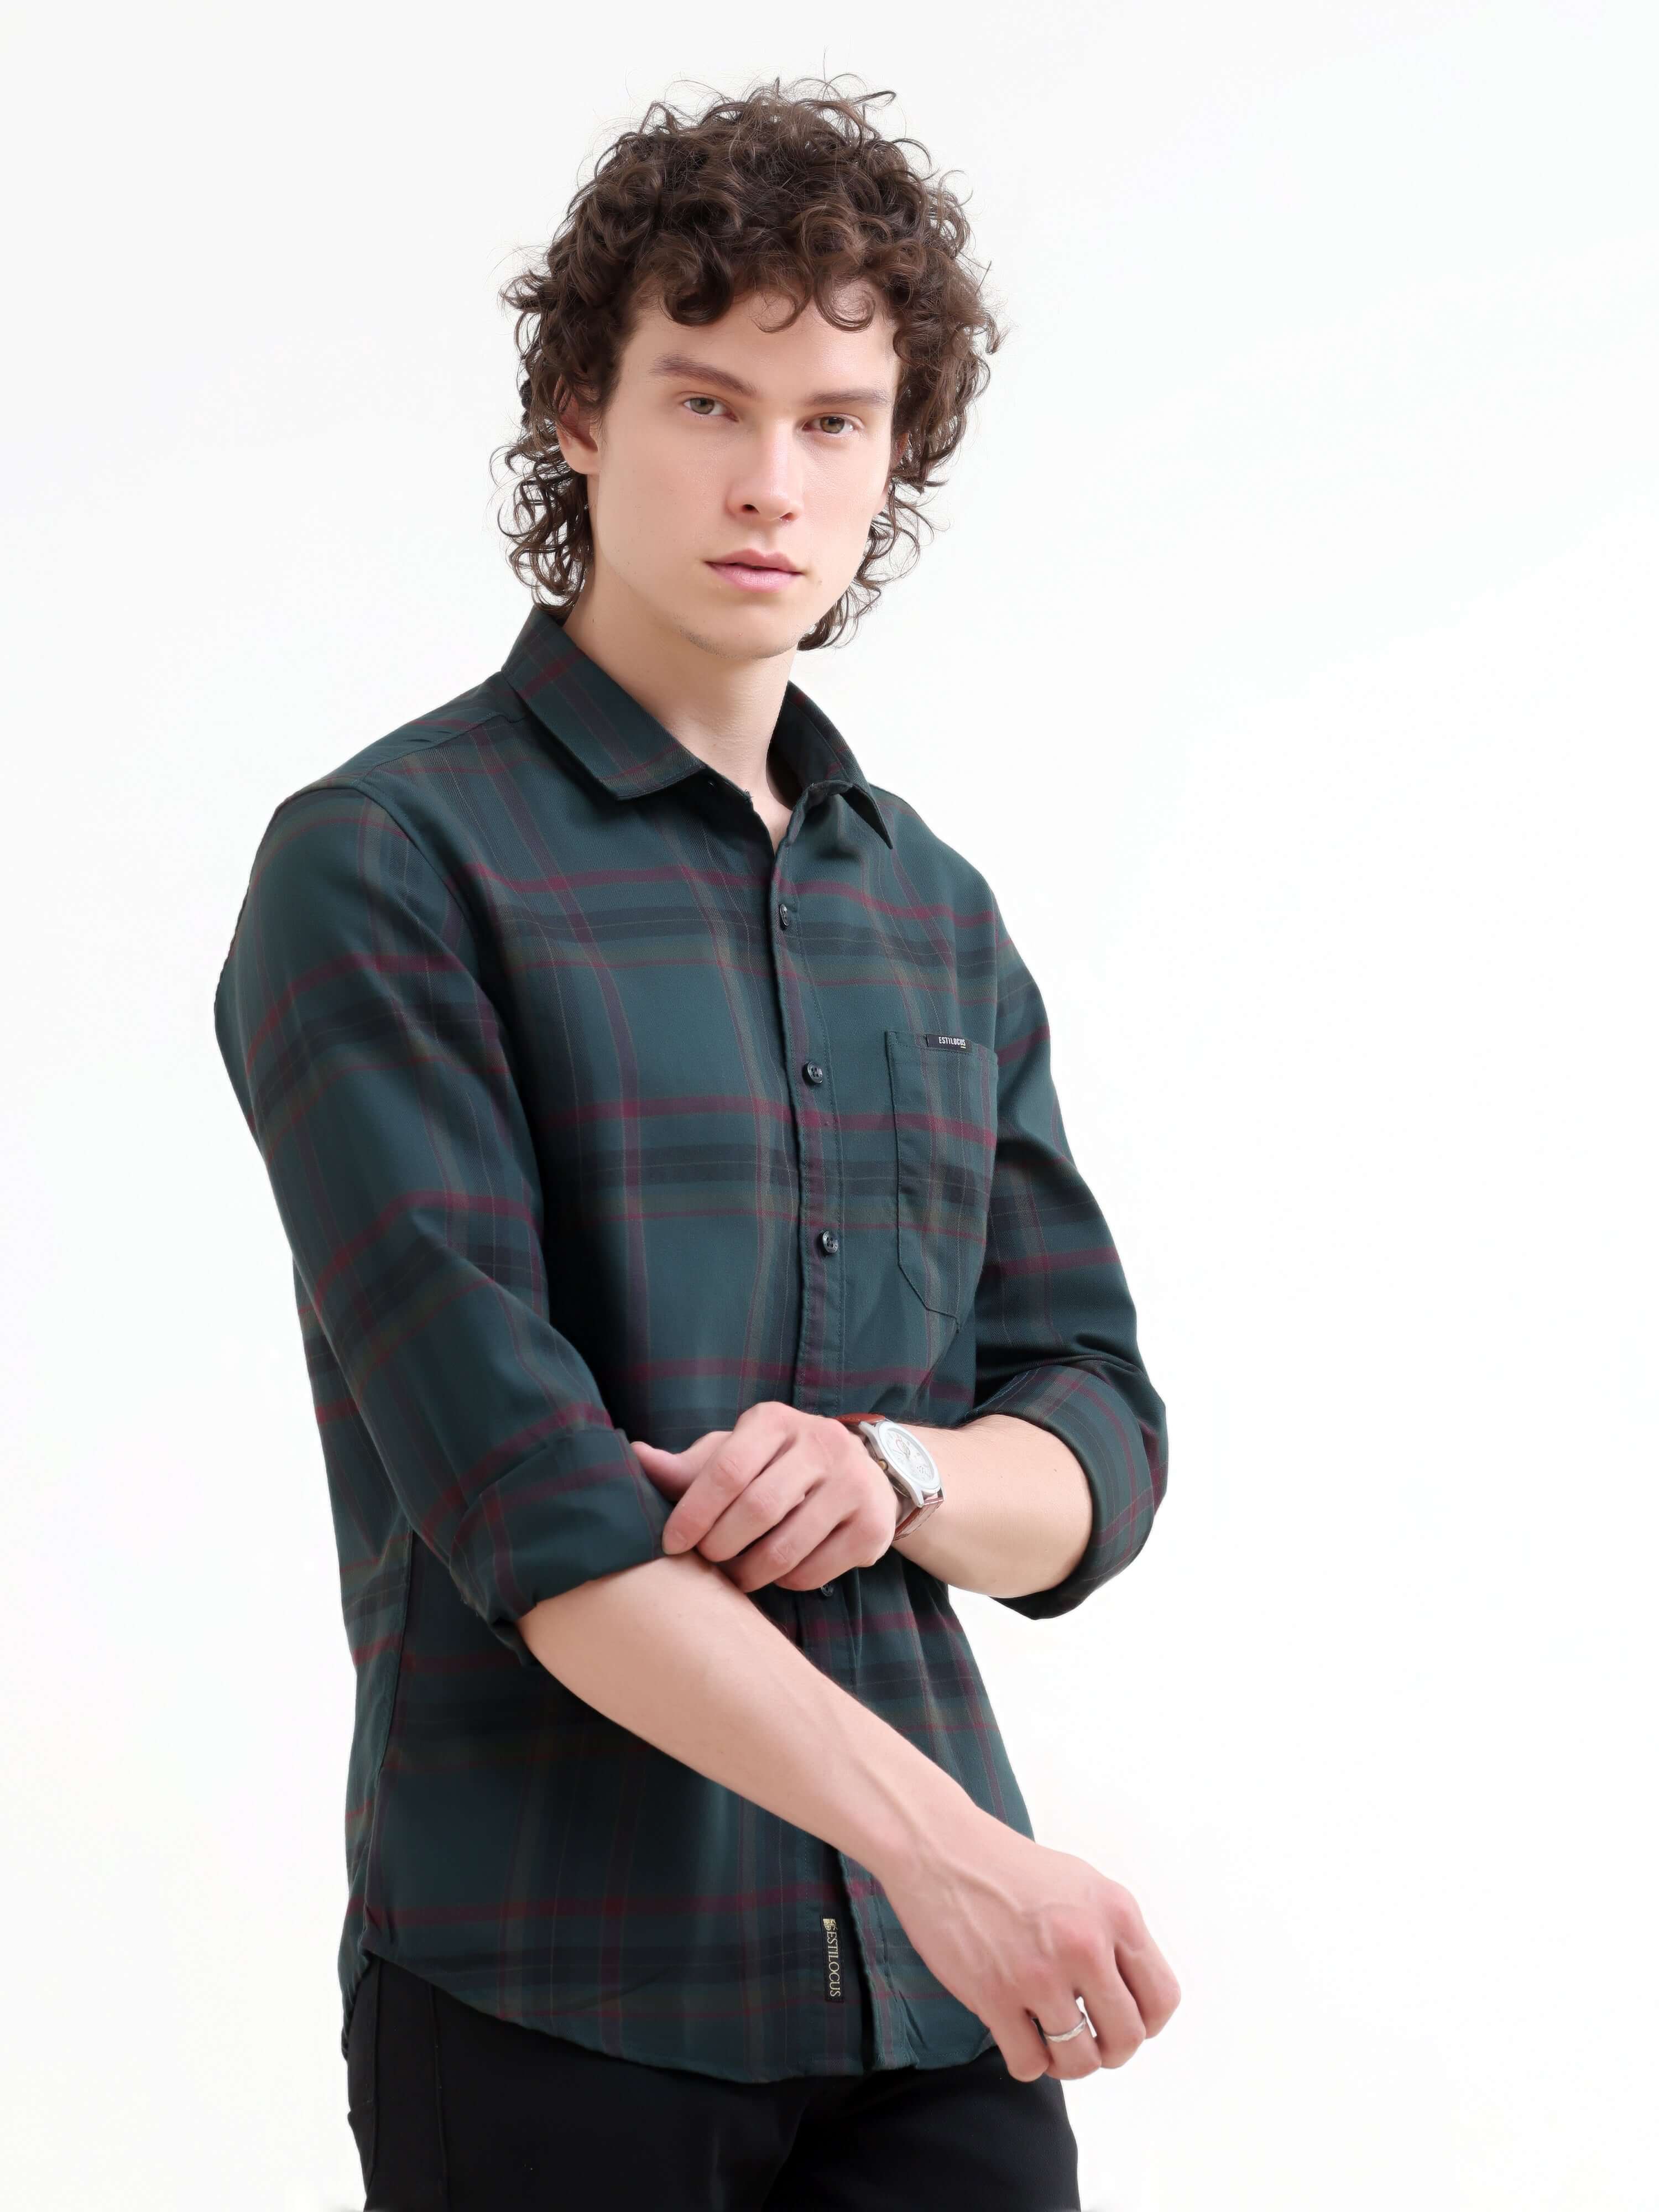 Green Check Shirt | Men's Summer New Arrival shop online at Estilocus. Elevate your style with the Boxlines green tonal check shirt - perfect for summer days & smart-casual evenings. Shop the latest in men's fashion now!